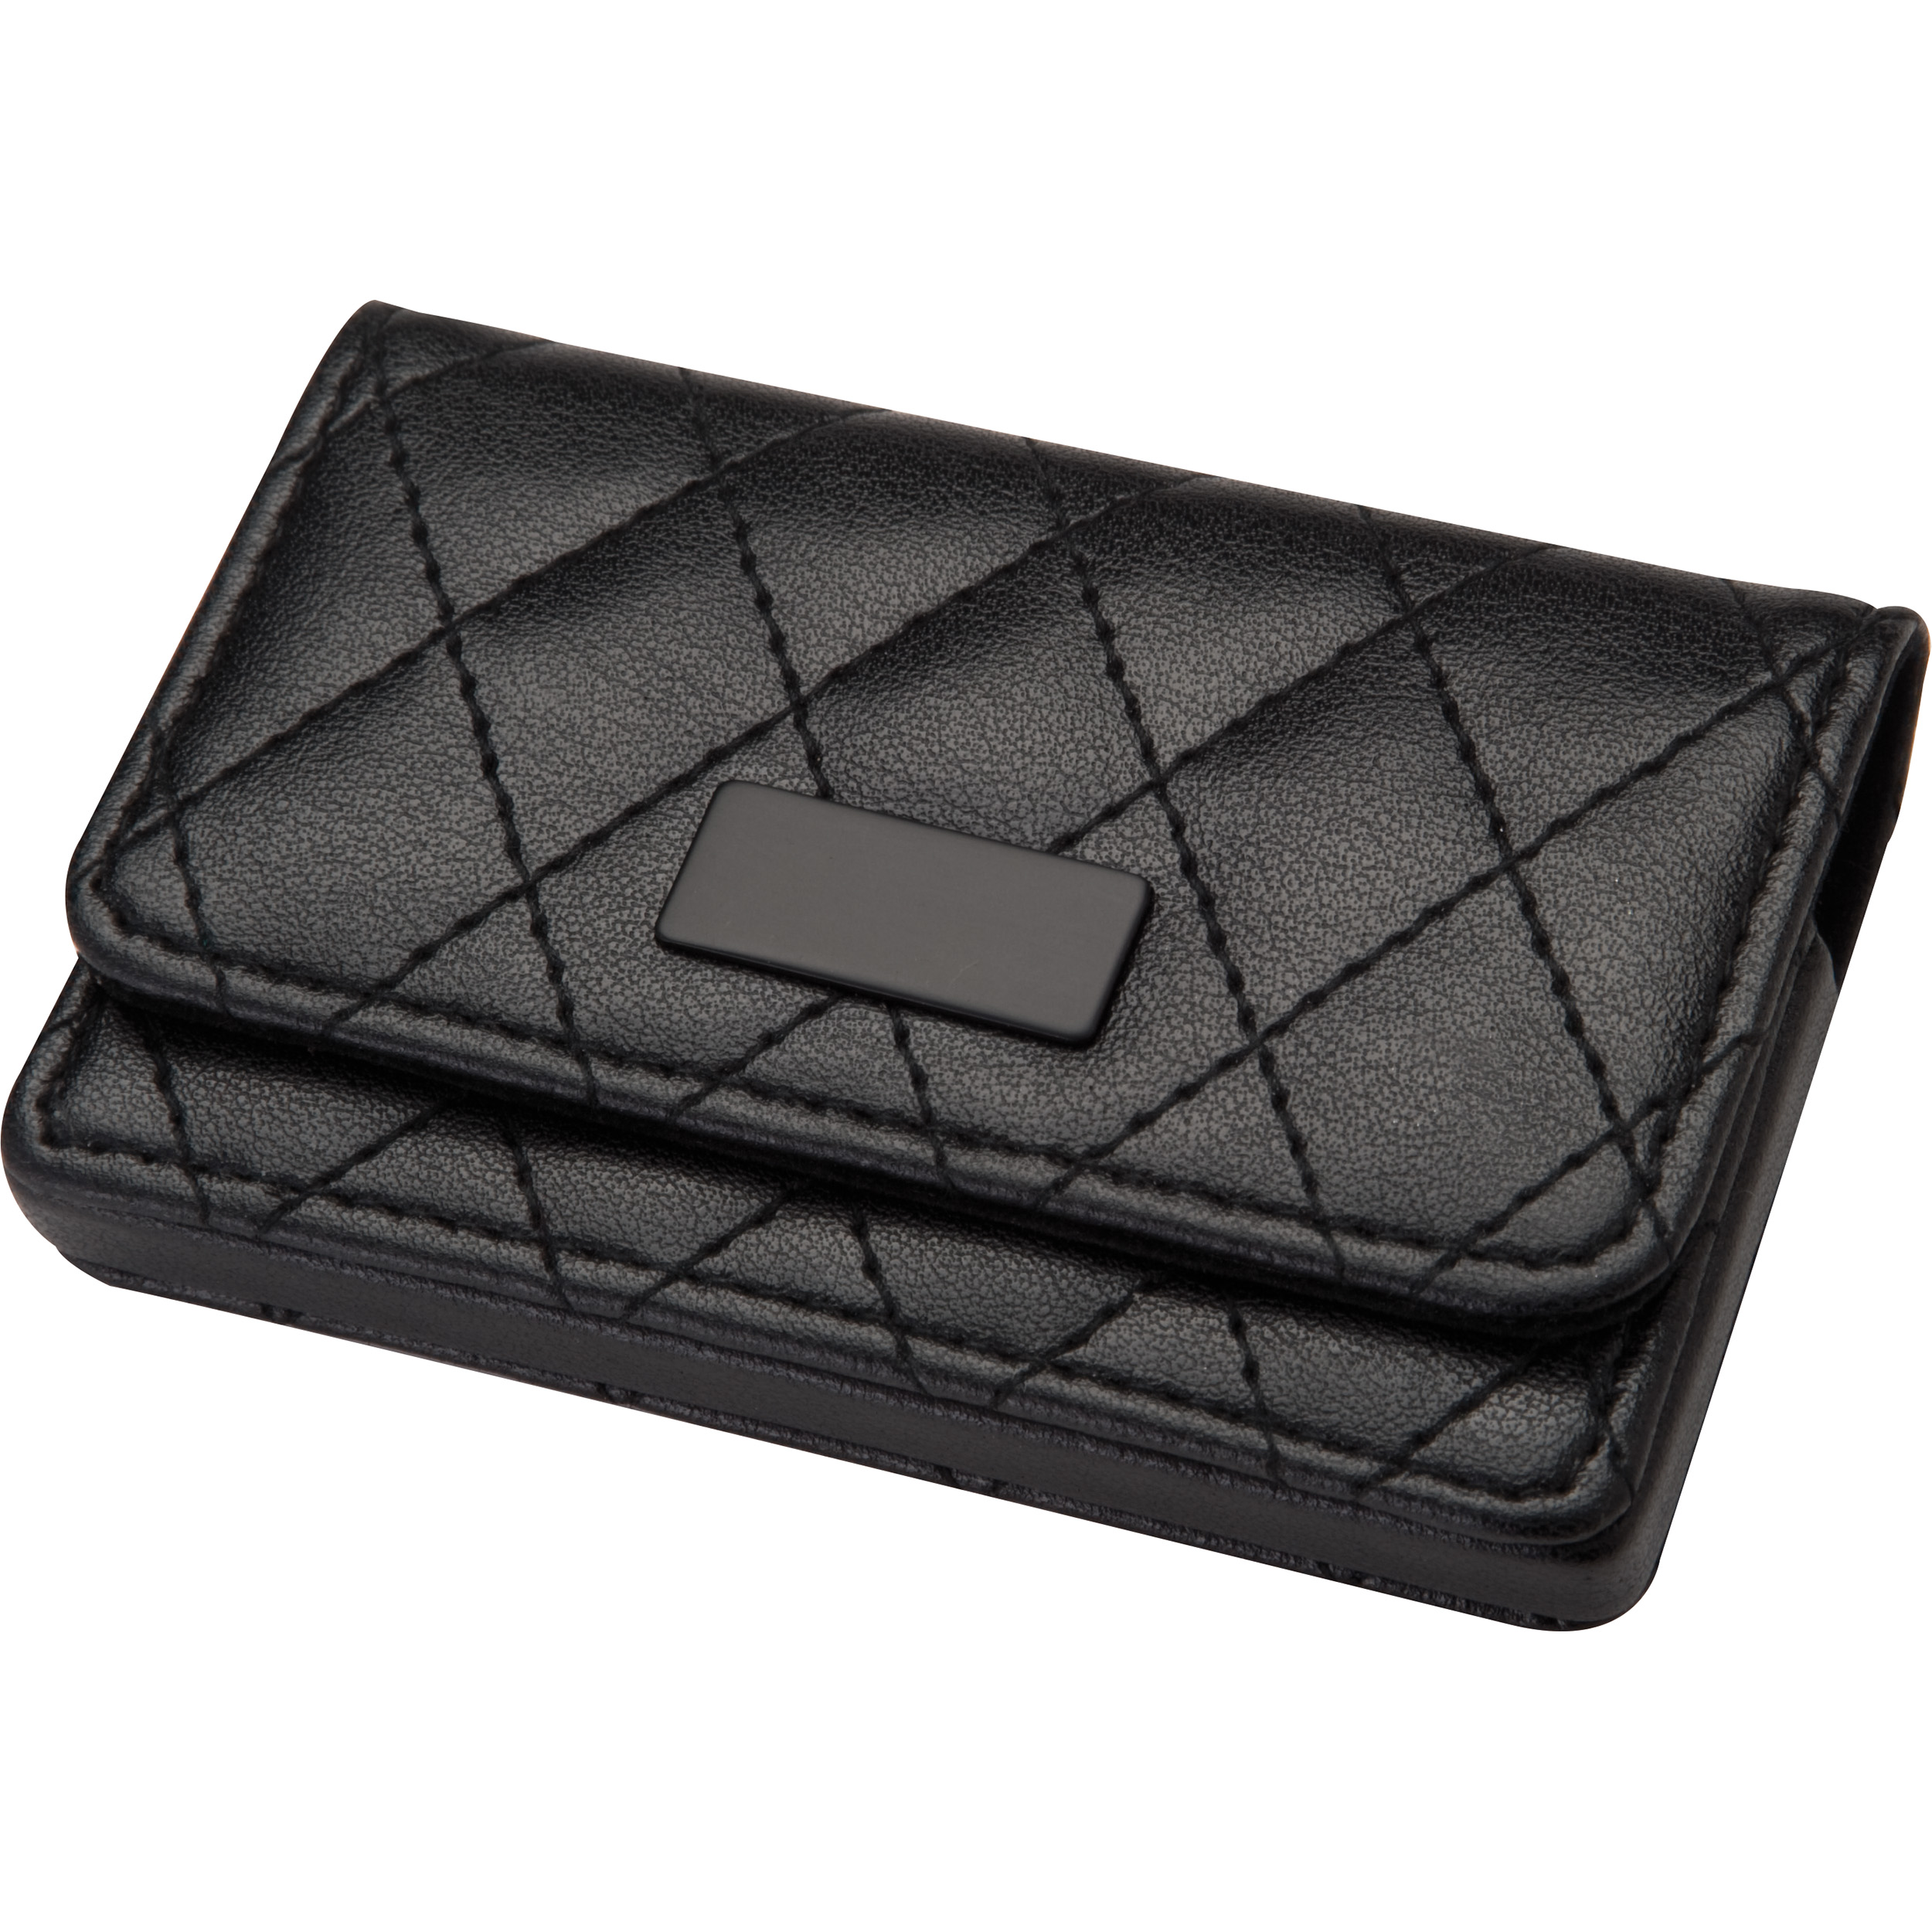 Business card holder with quilted pattern